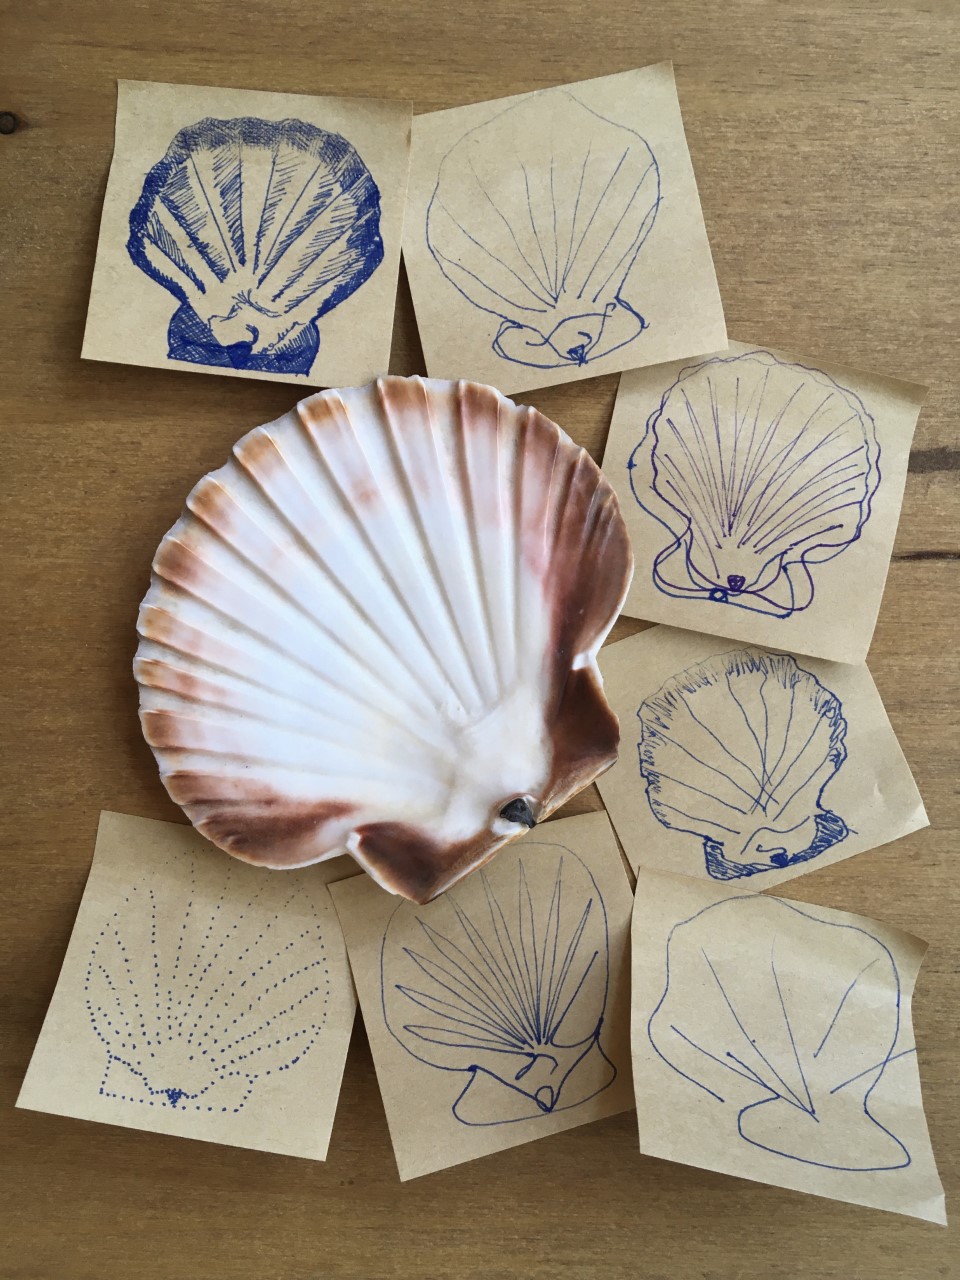 A shell surrounded by drawings of shells on post it notes